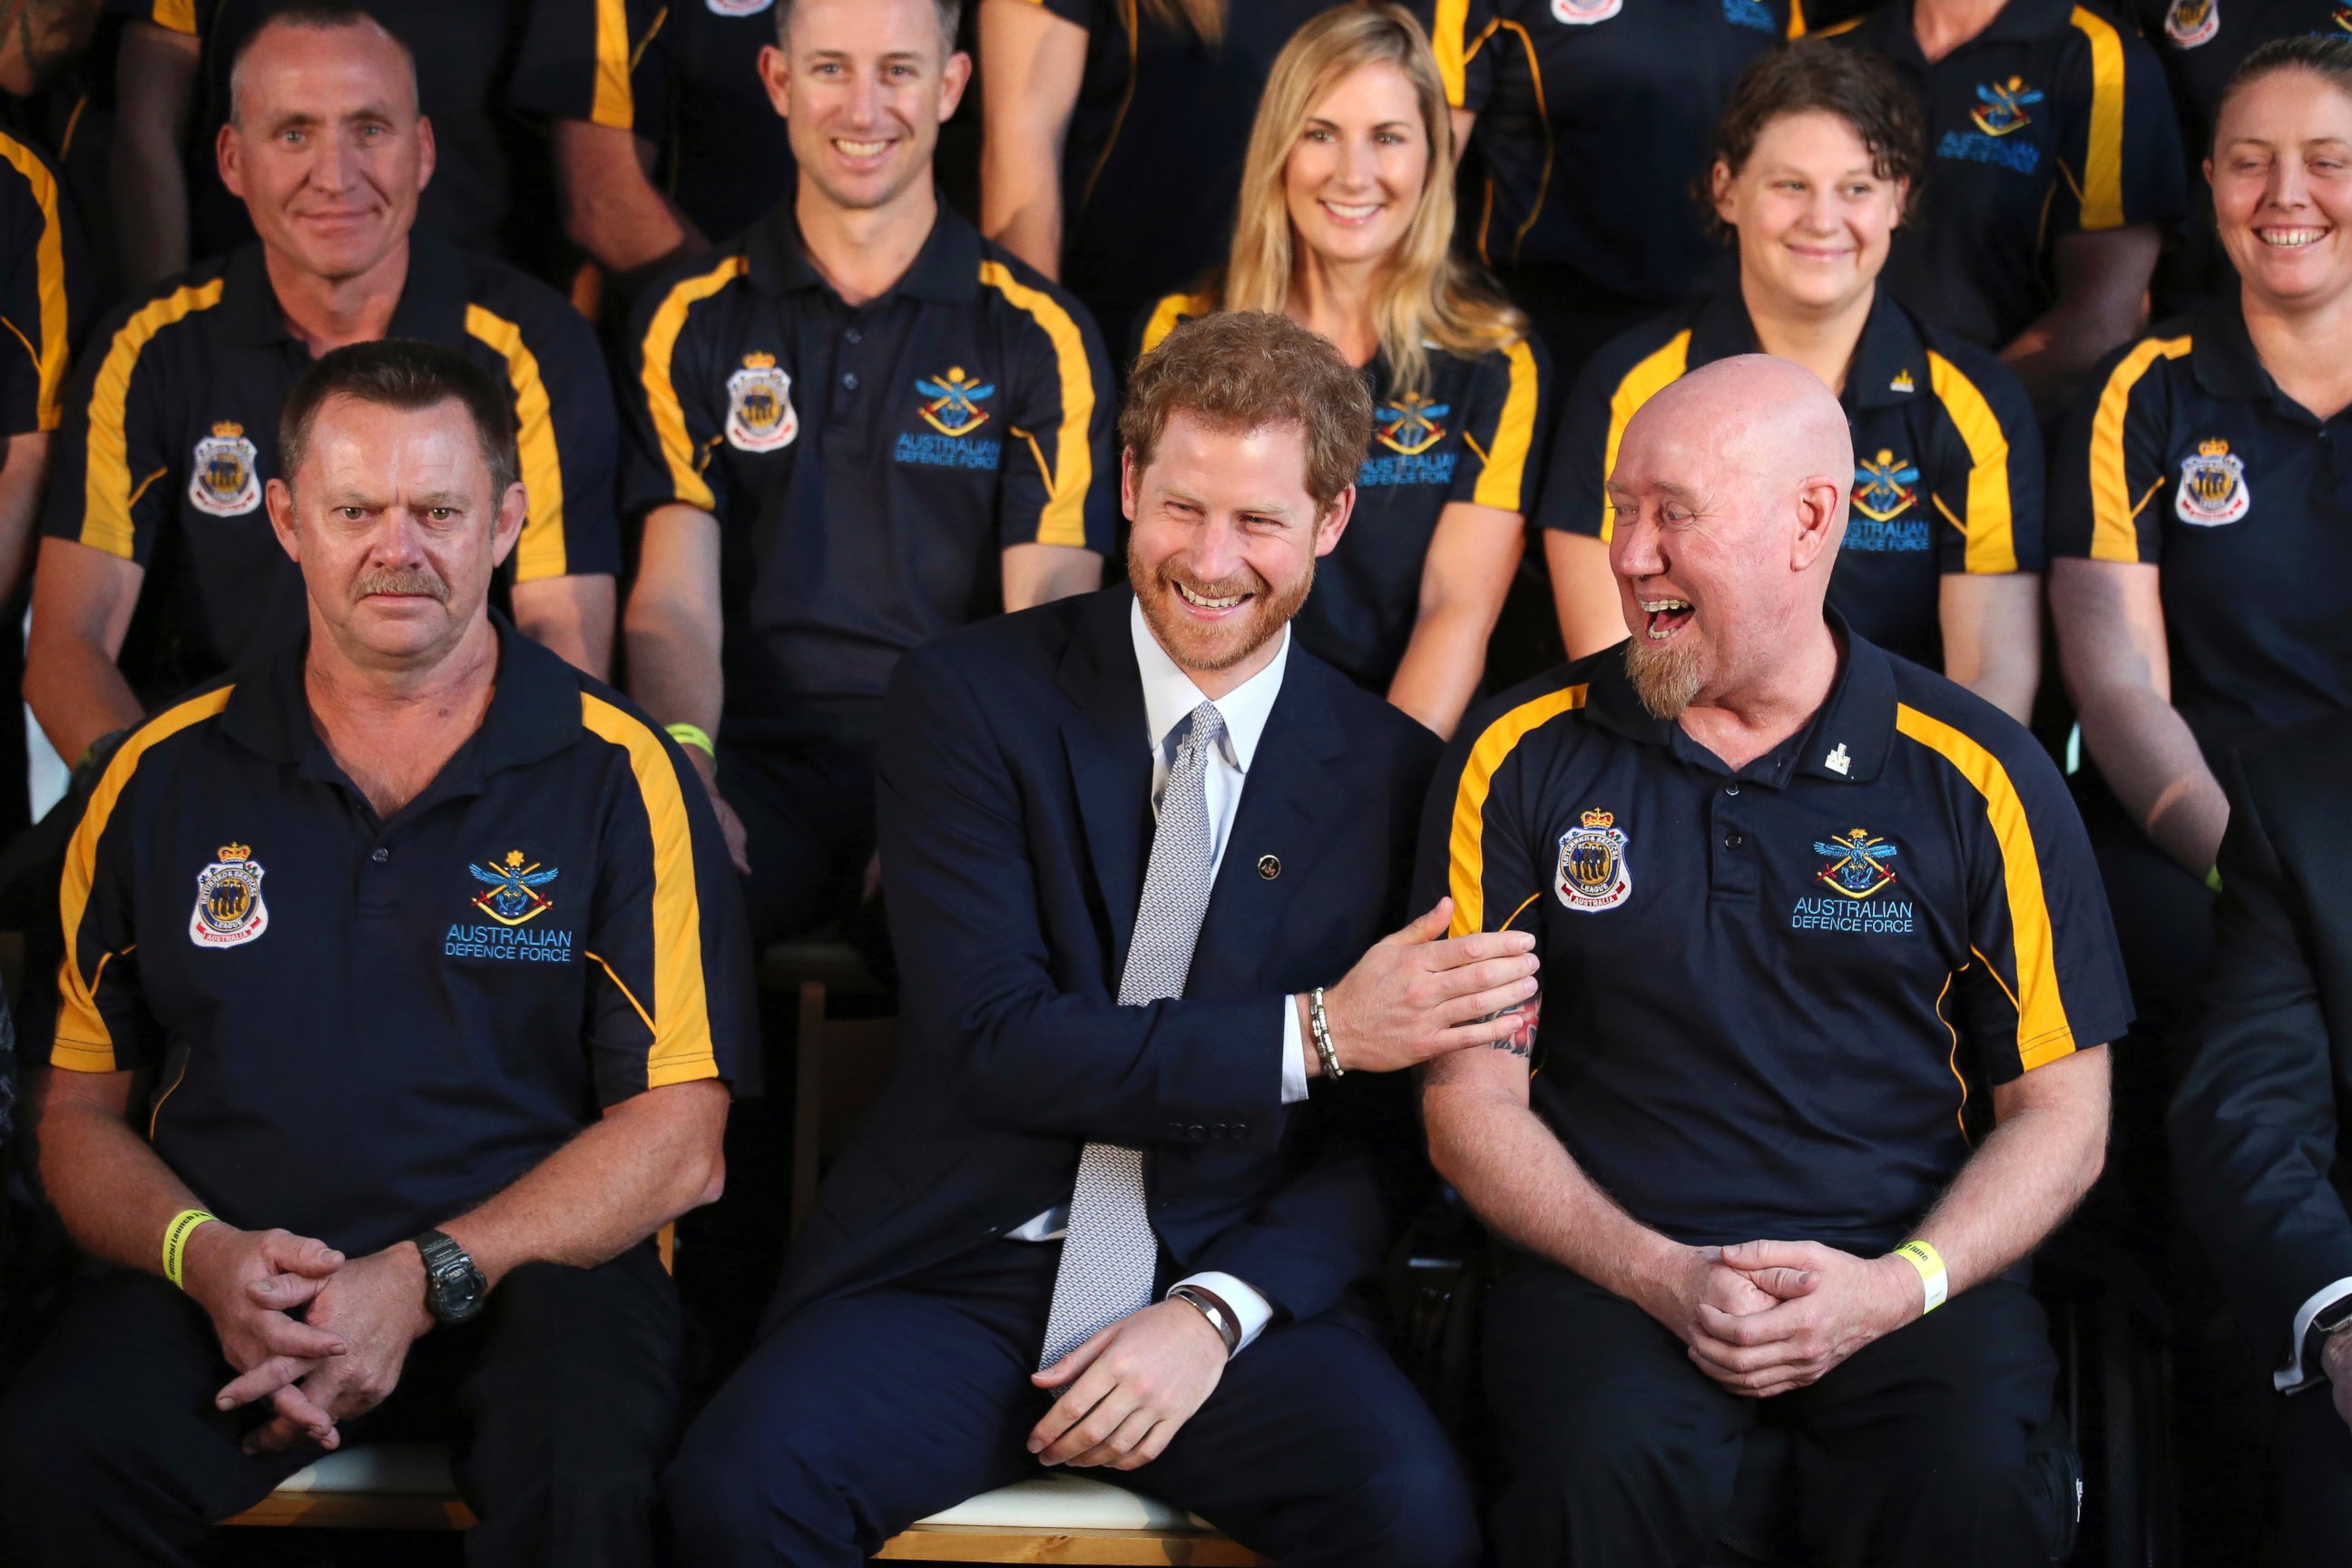 PHOTO: Britain's Prince Harry laughs with Jeff Wright during a photo opportunity at a function at Admiralty House in Sydney, June 7, 2017. Prince Harry is in Sydney to launch the 2018 Invictus Games.